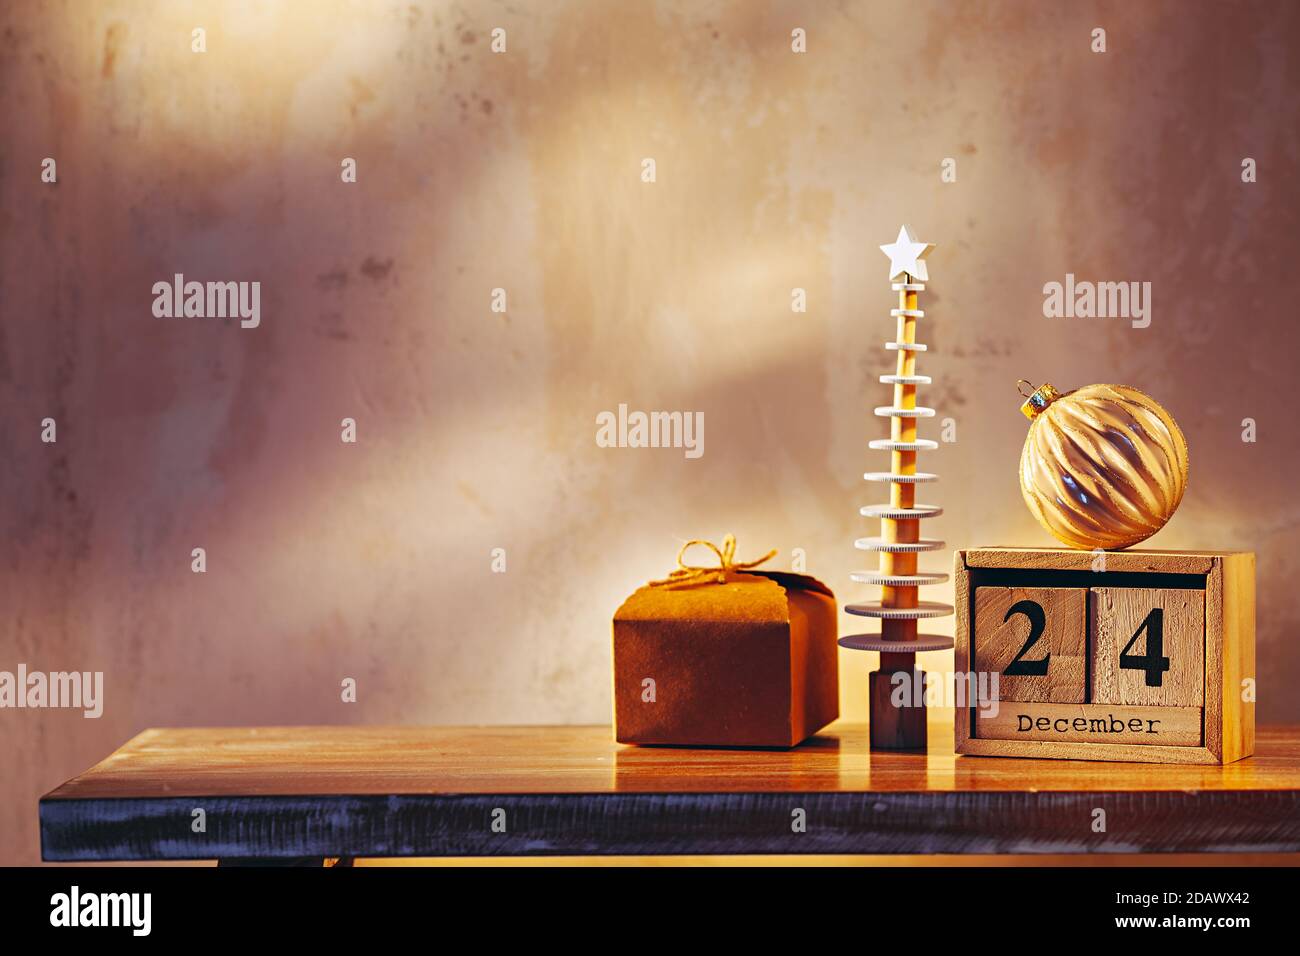 Simple image with christmas tree, gift, ornament and wooden calendar Stock Photo